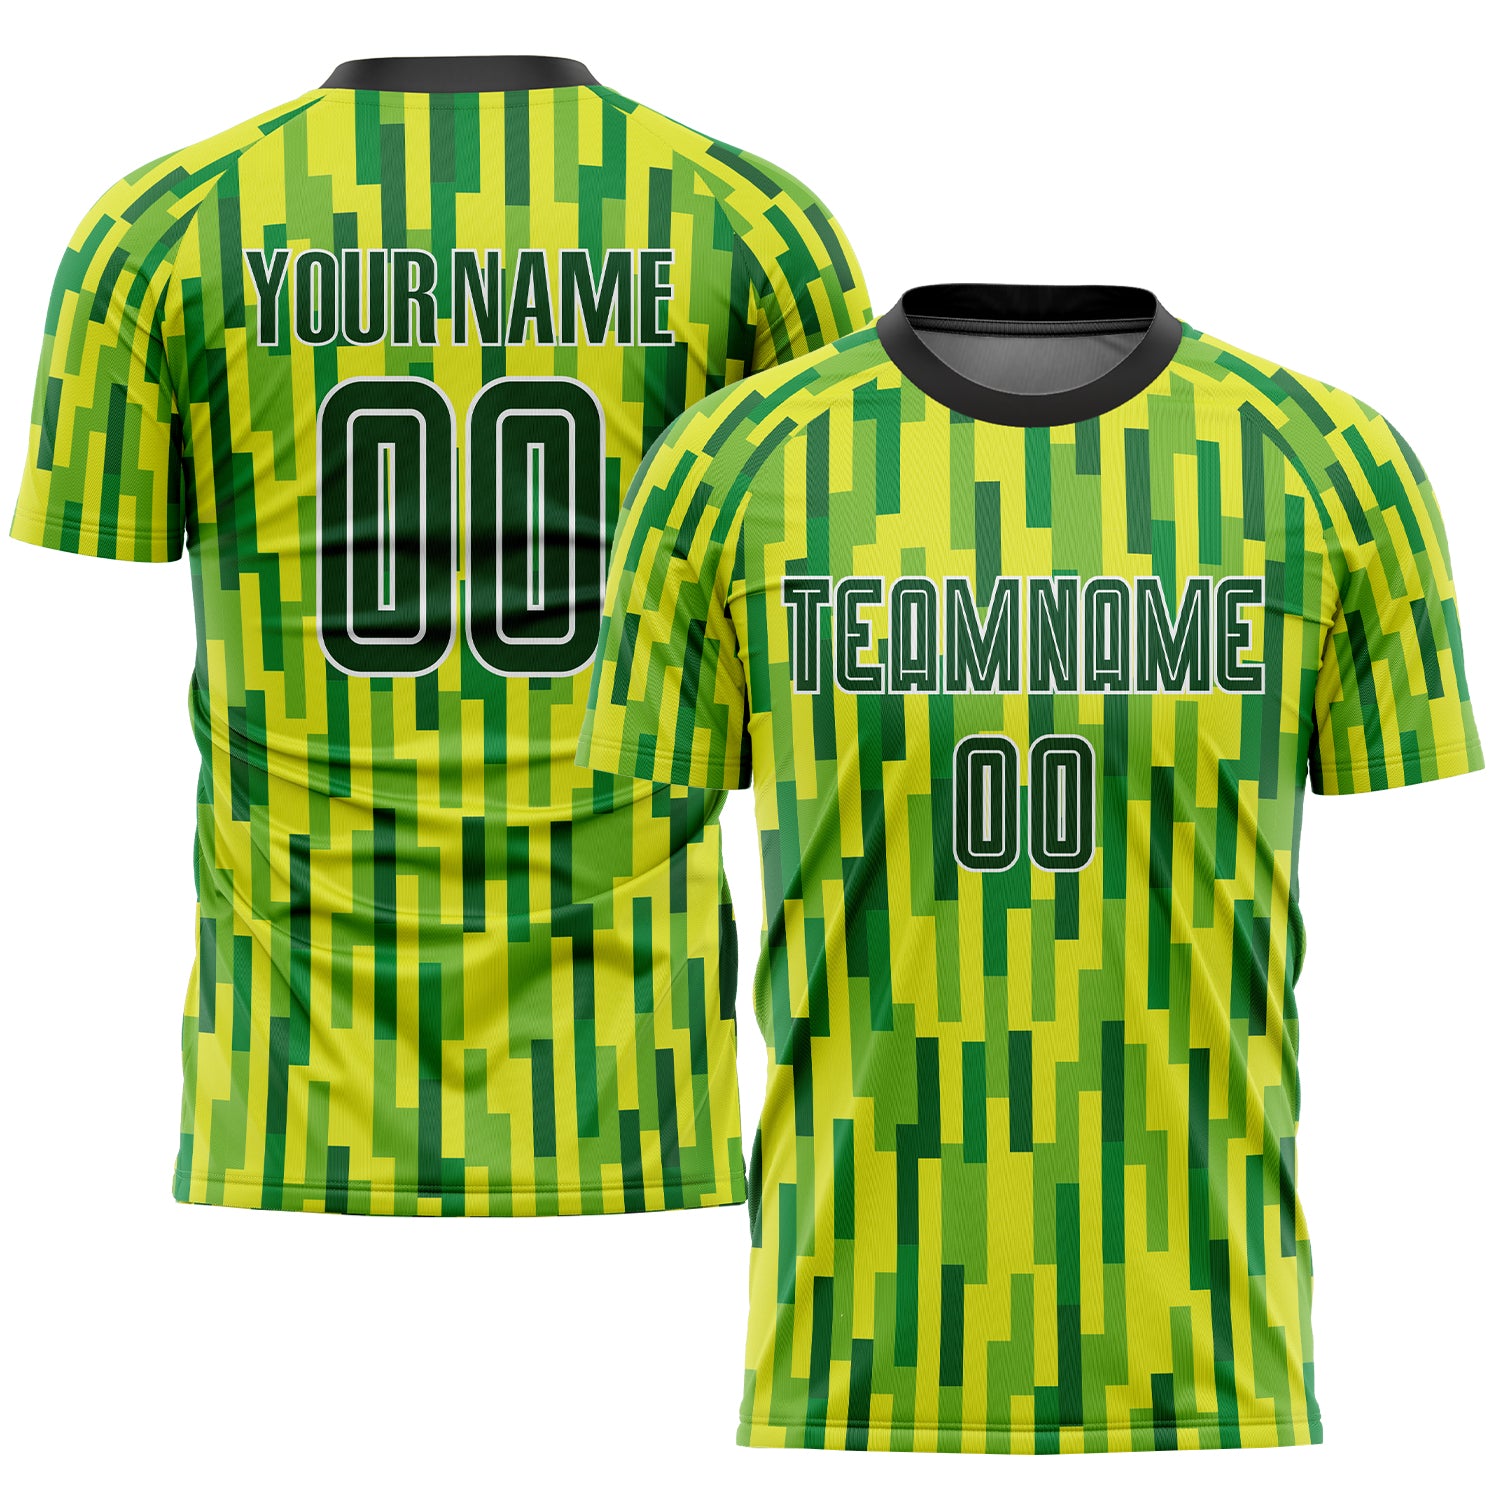 Buy Jersey Design on X: Yellow and Dark Green Striped Soccer Jersey Design    / X